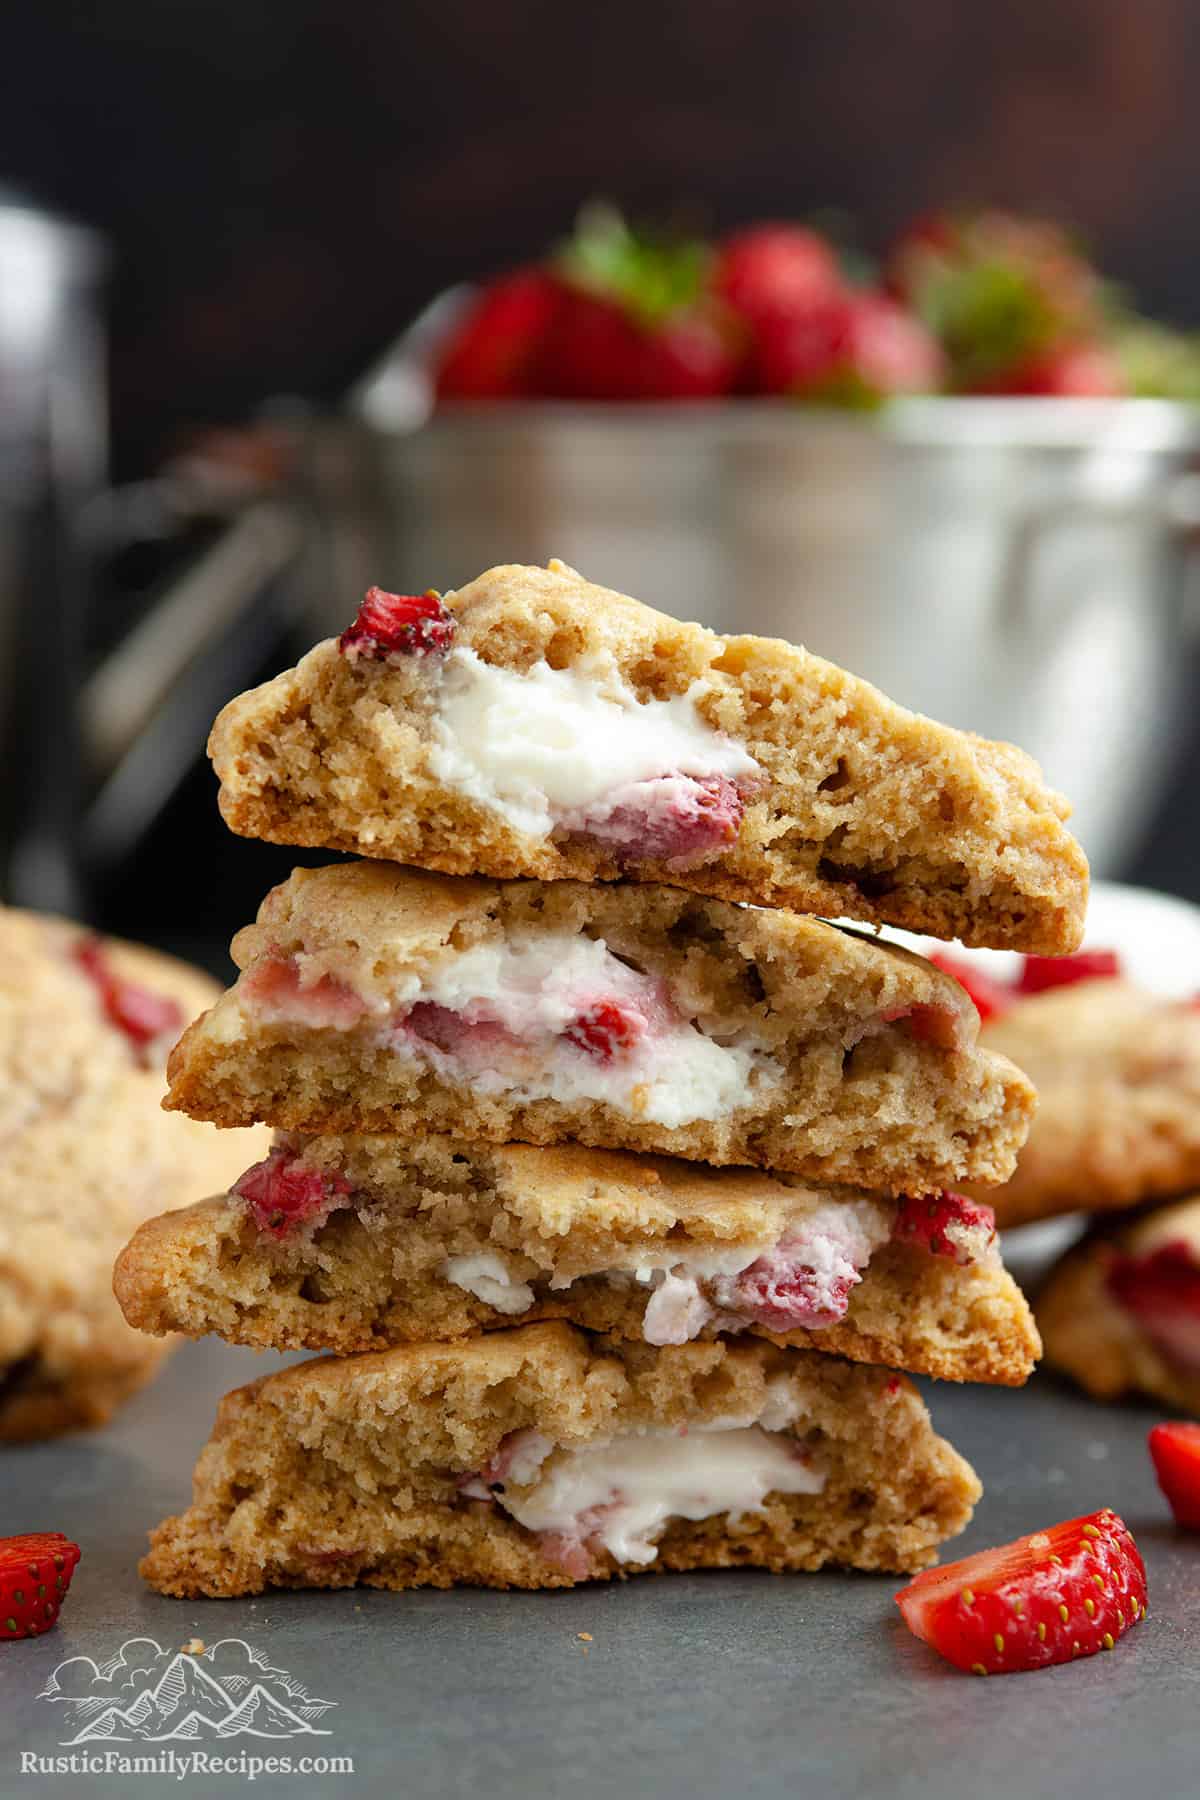 Stack of cookies broken in half, each one stuffed with cheesecake